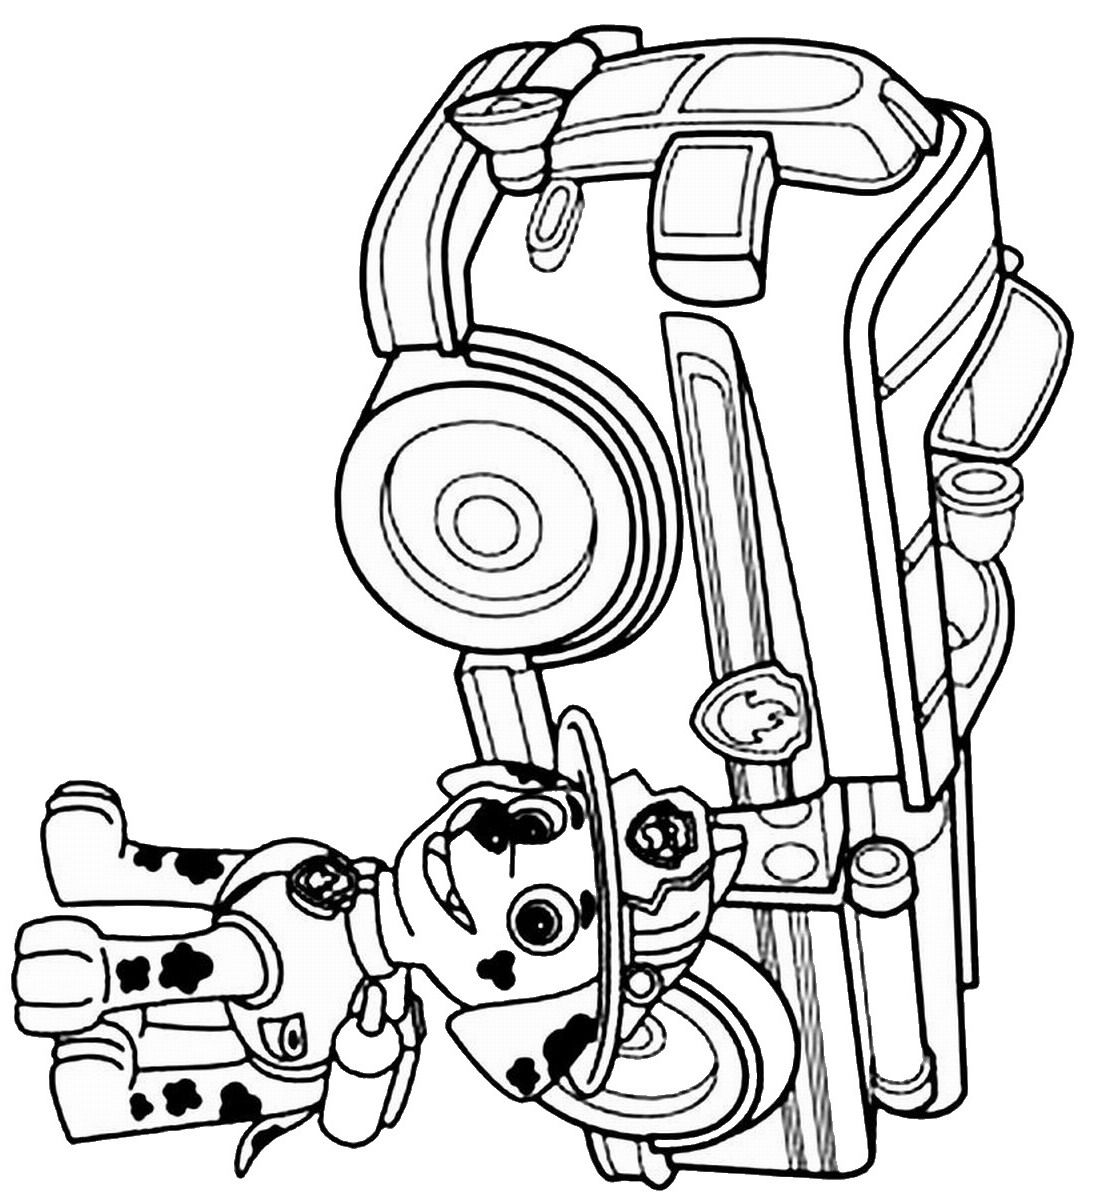 Creative coloring pages for paw patrol fans